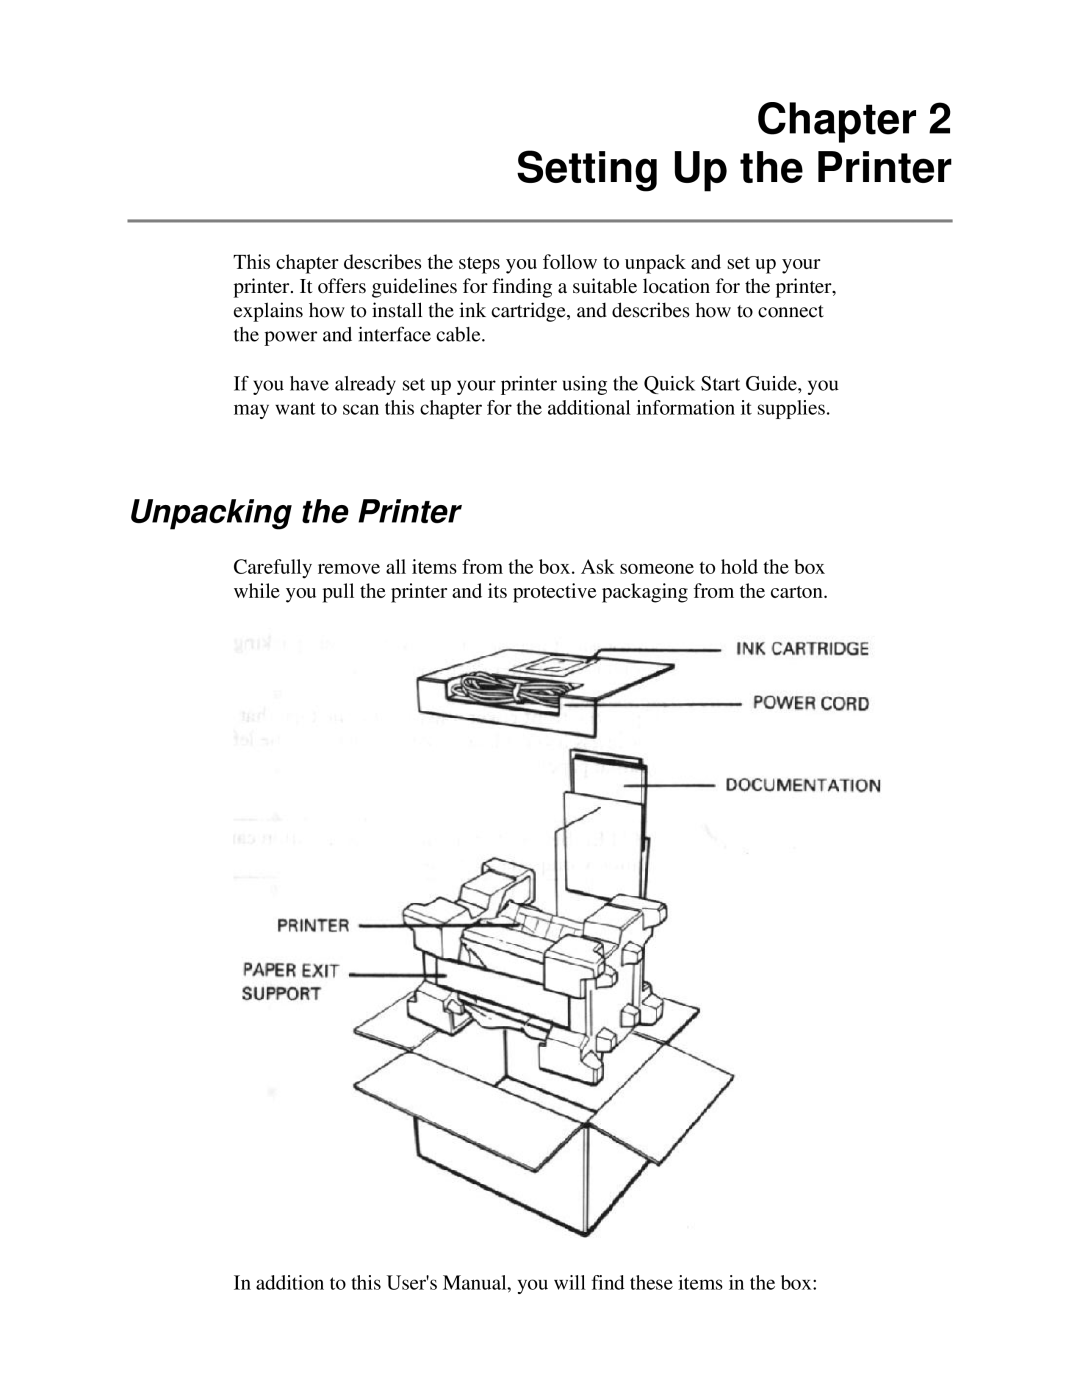 Canon BJ-230 user manual Chapter Setting Up the Printer, Unpacking the Printer 